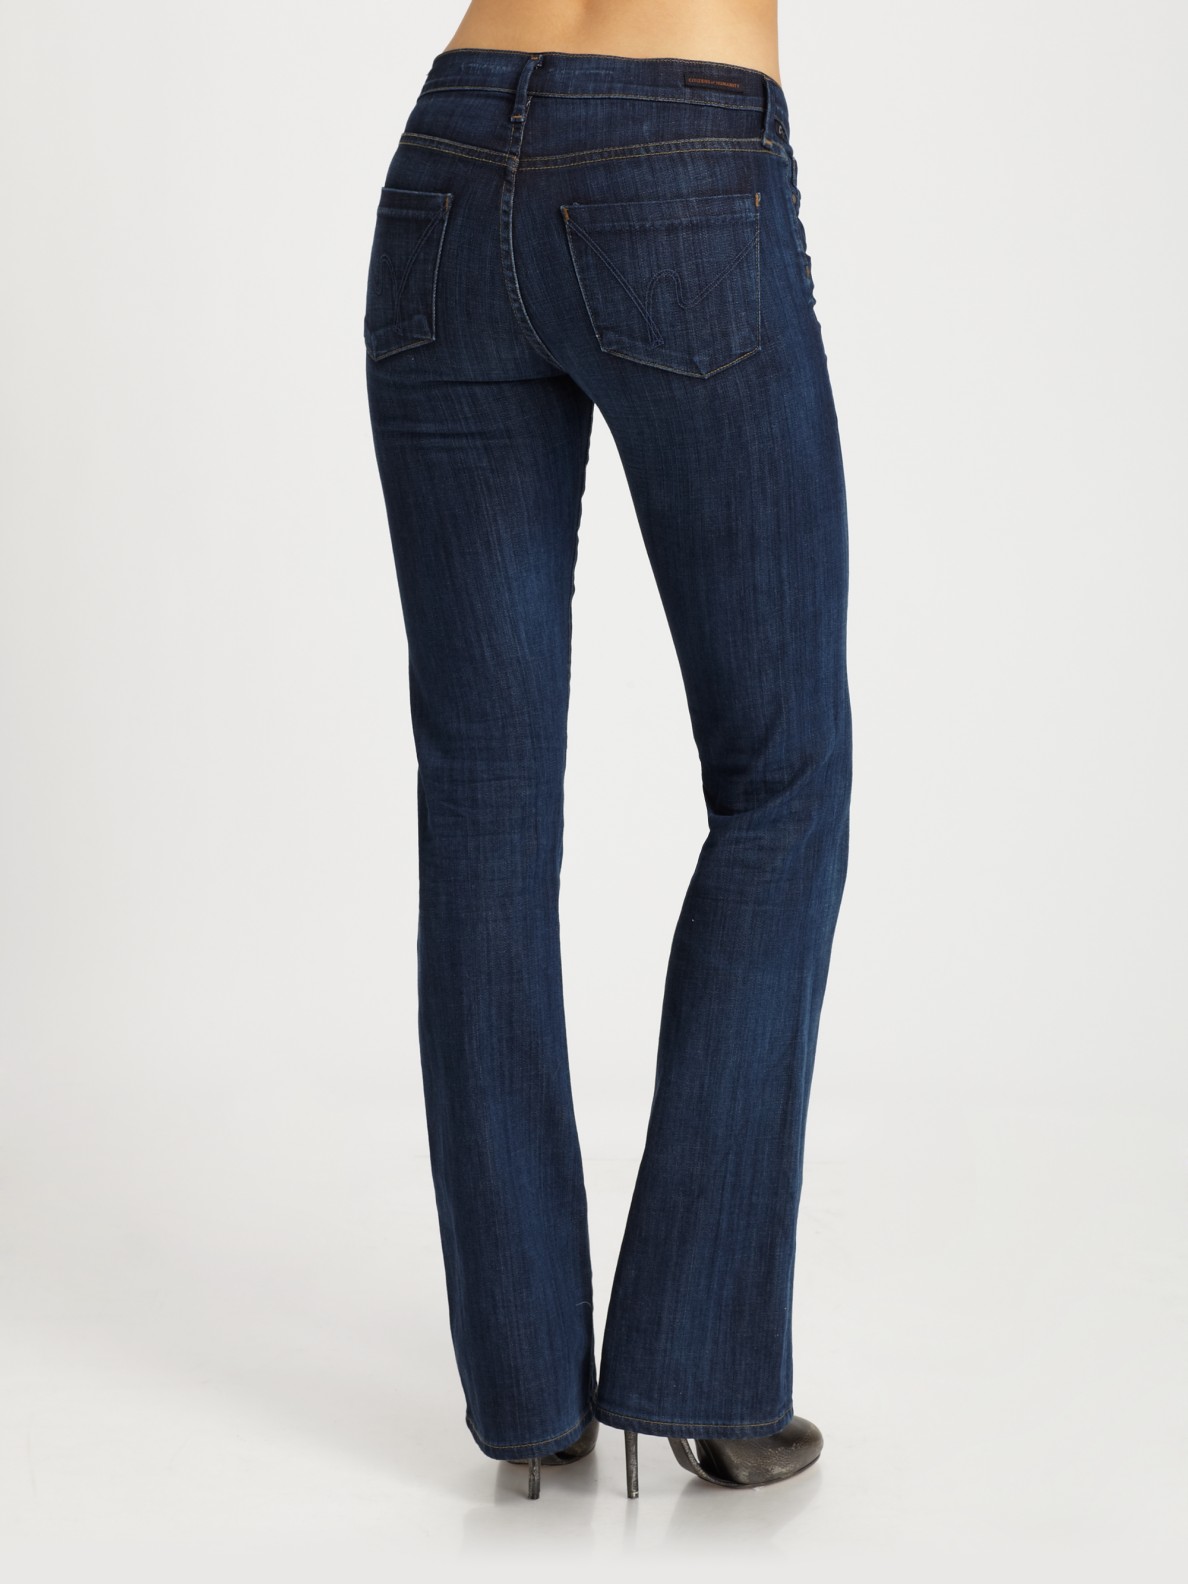 Citizens of Humanity Amber Medium Rise Bootcut Jeans in Blue | Lyst